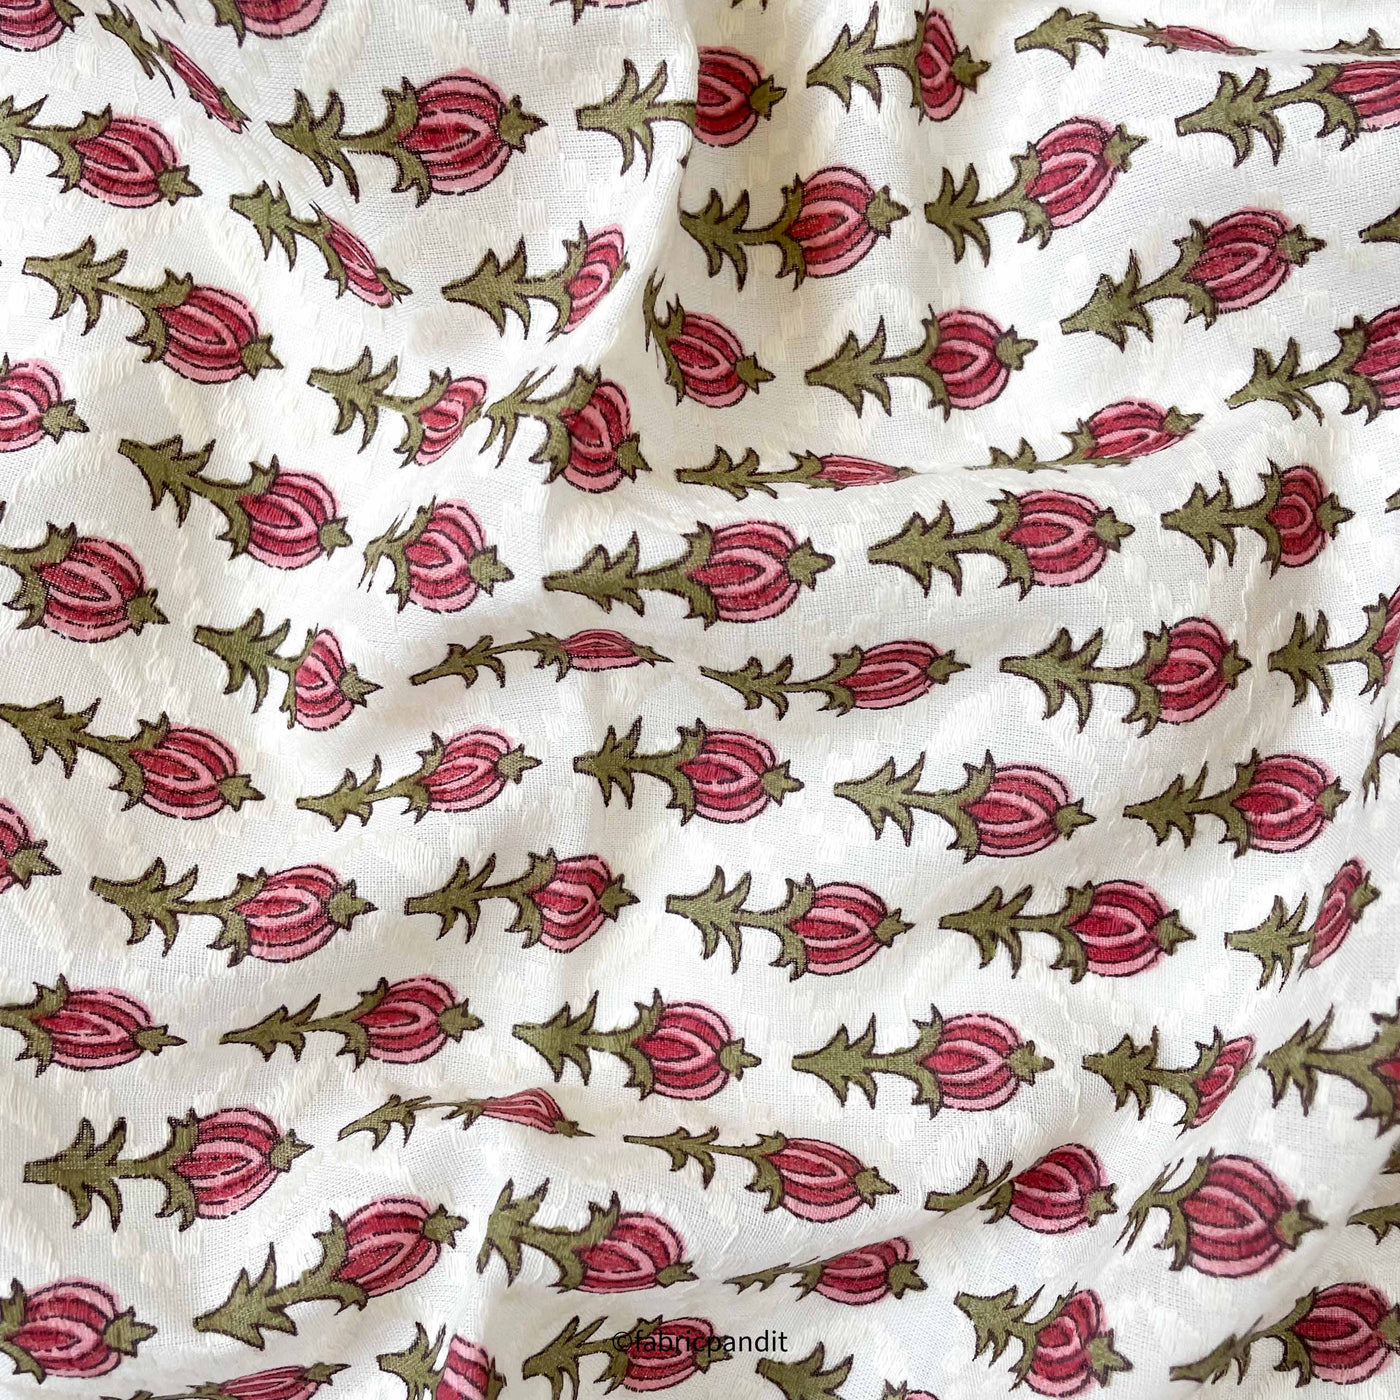 Hand Block Printed Cotton Fabric Cut Piece (CUT PIECE) Pink & Green Pumpkin Flower Hand Block Printed Pure Cotton Dobby Fabric (Width 42 inches)